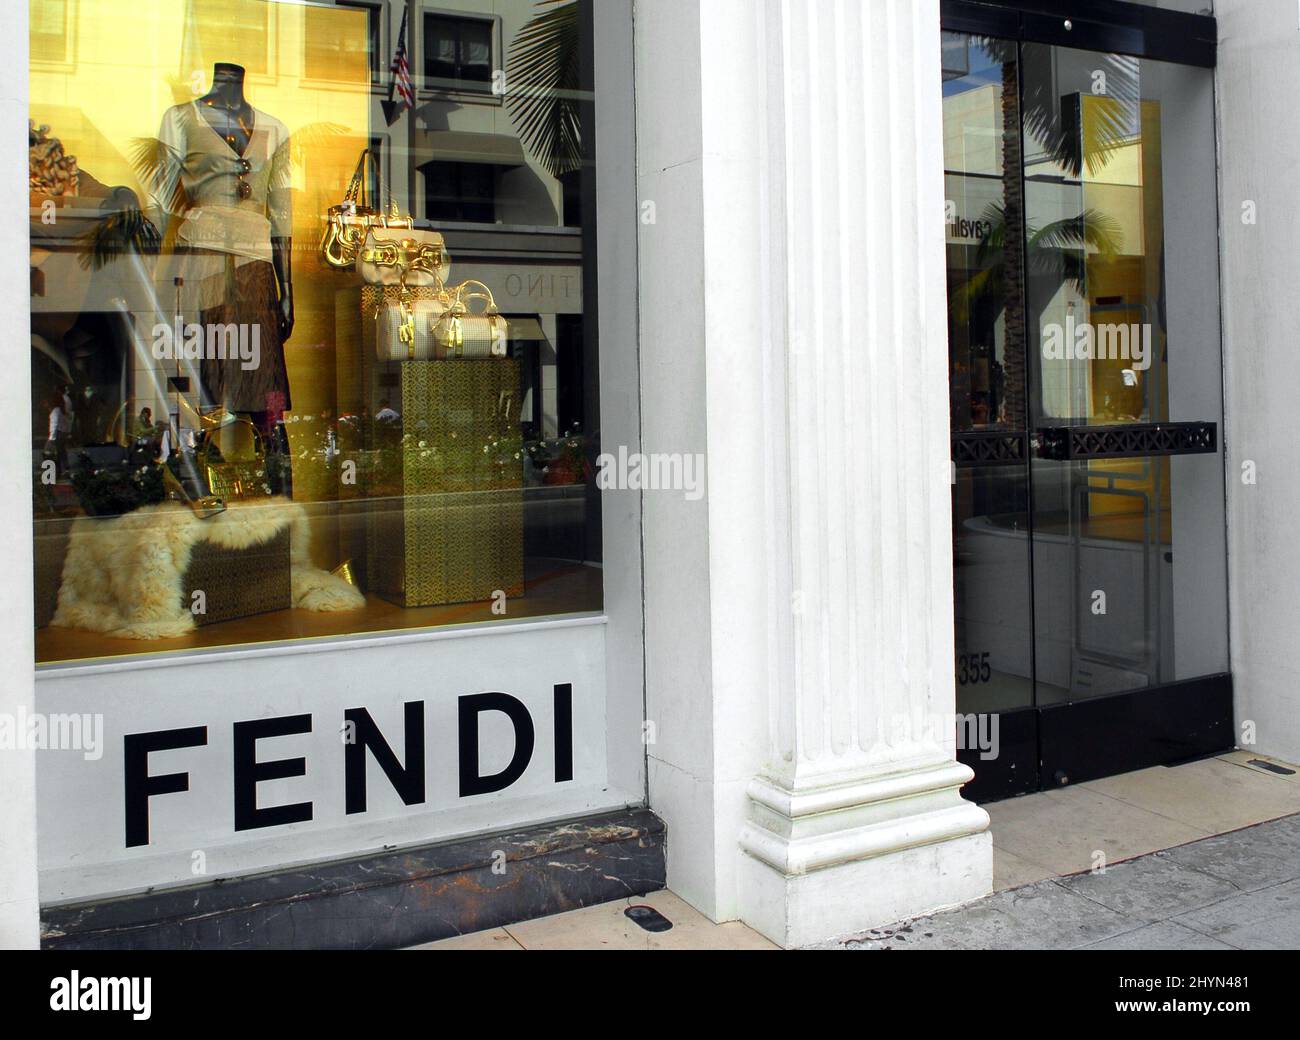 Fendi Celebrates Relocated Rodeo Drive Flagship with Alessandra